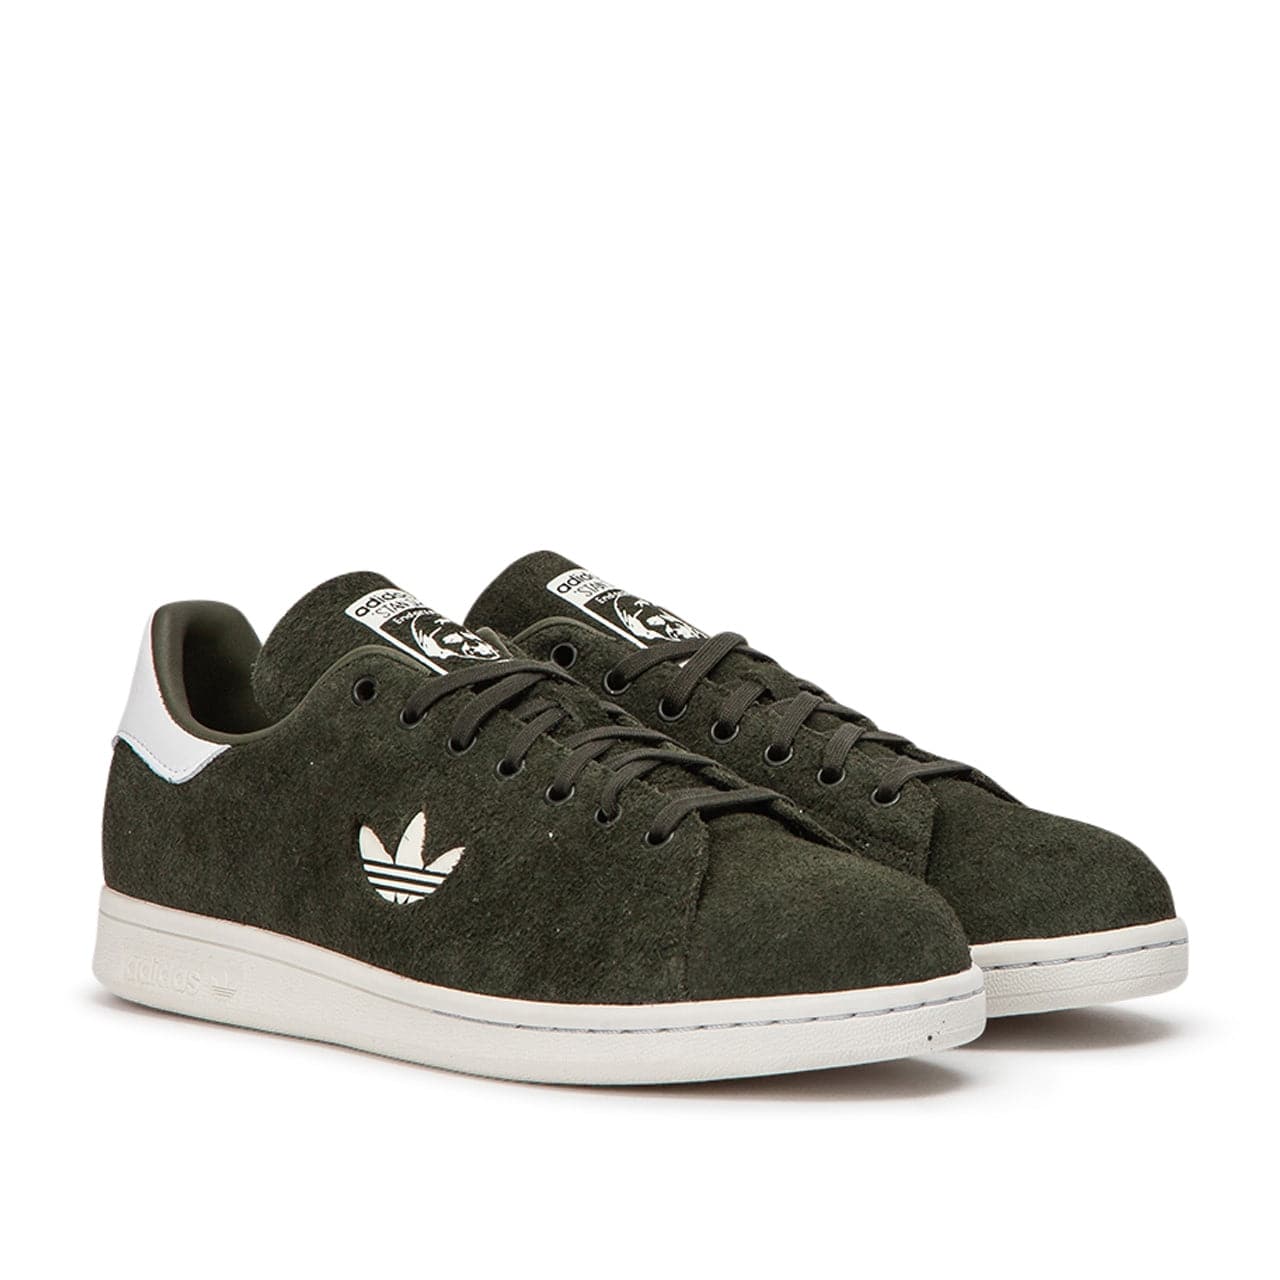 adidas Stan Smith (Olive)  - Allike Store